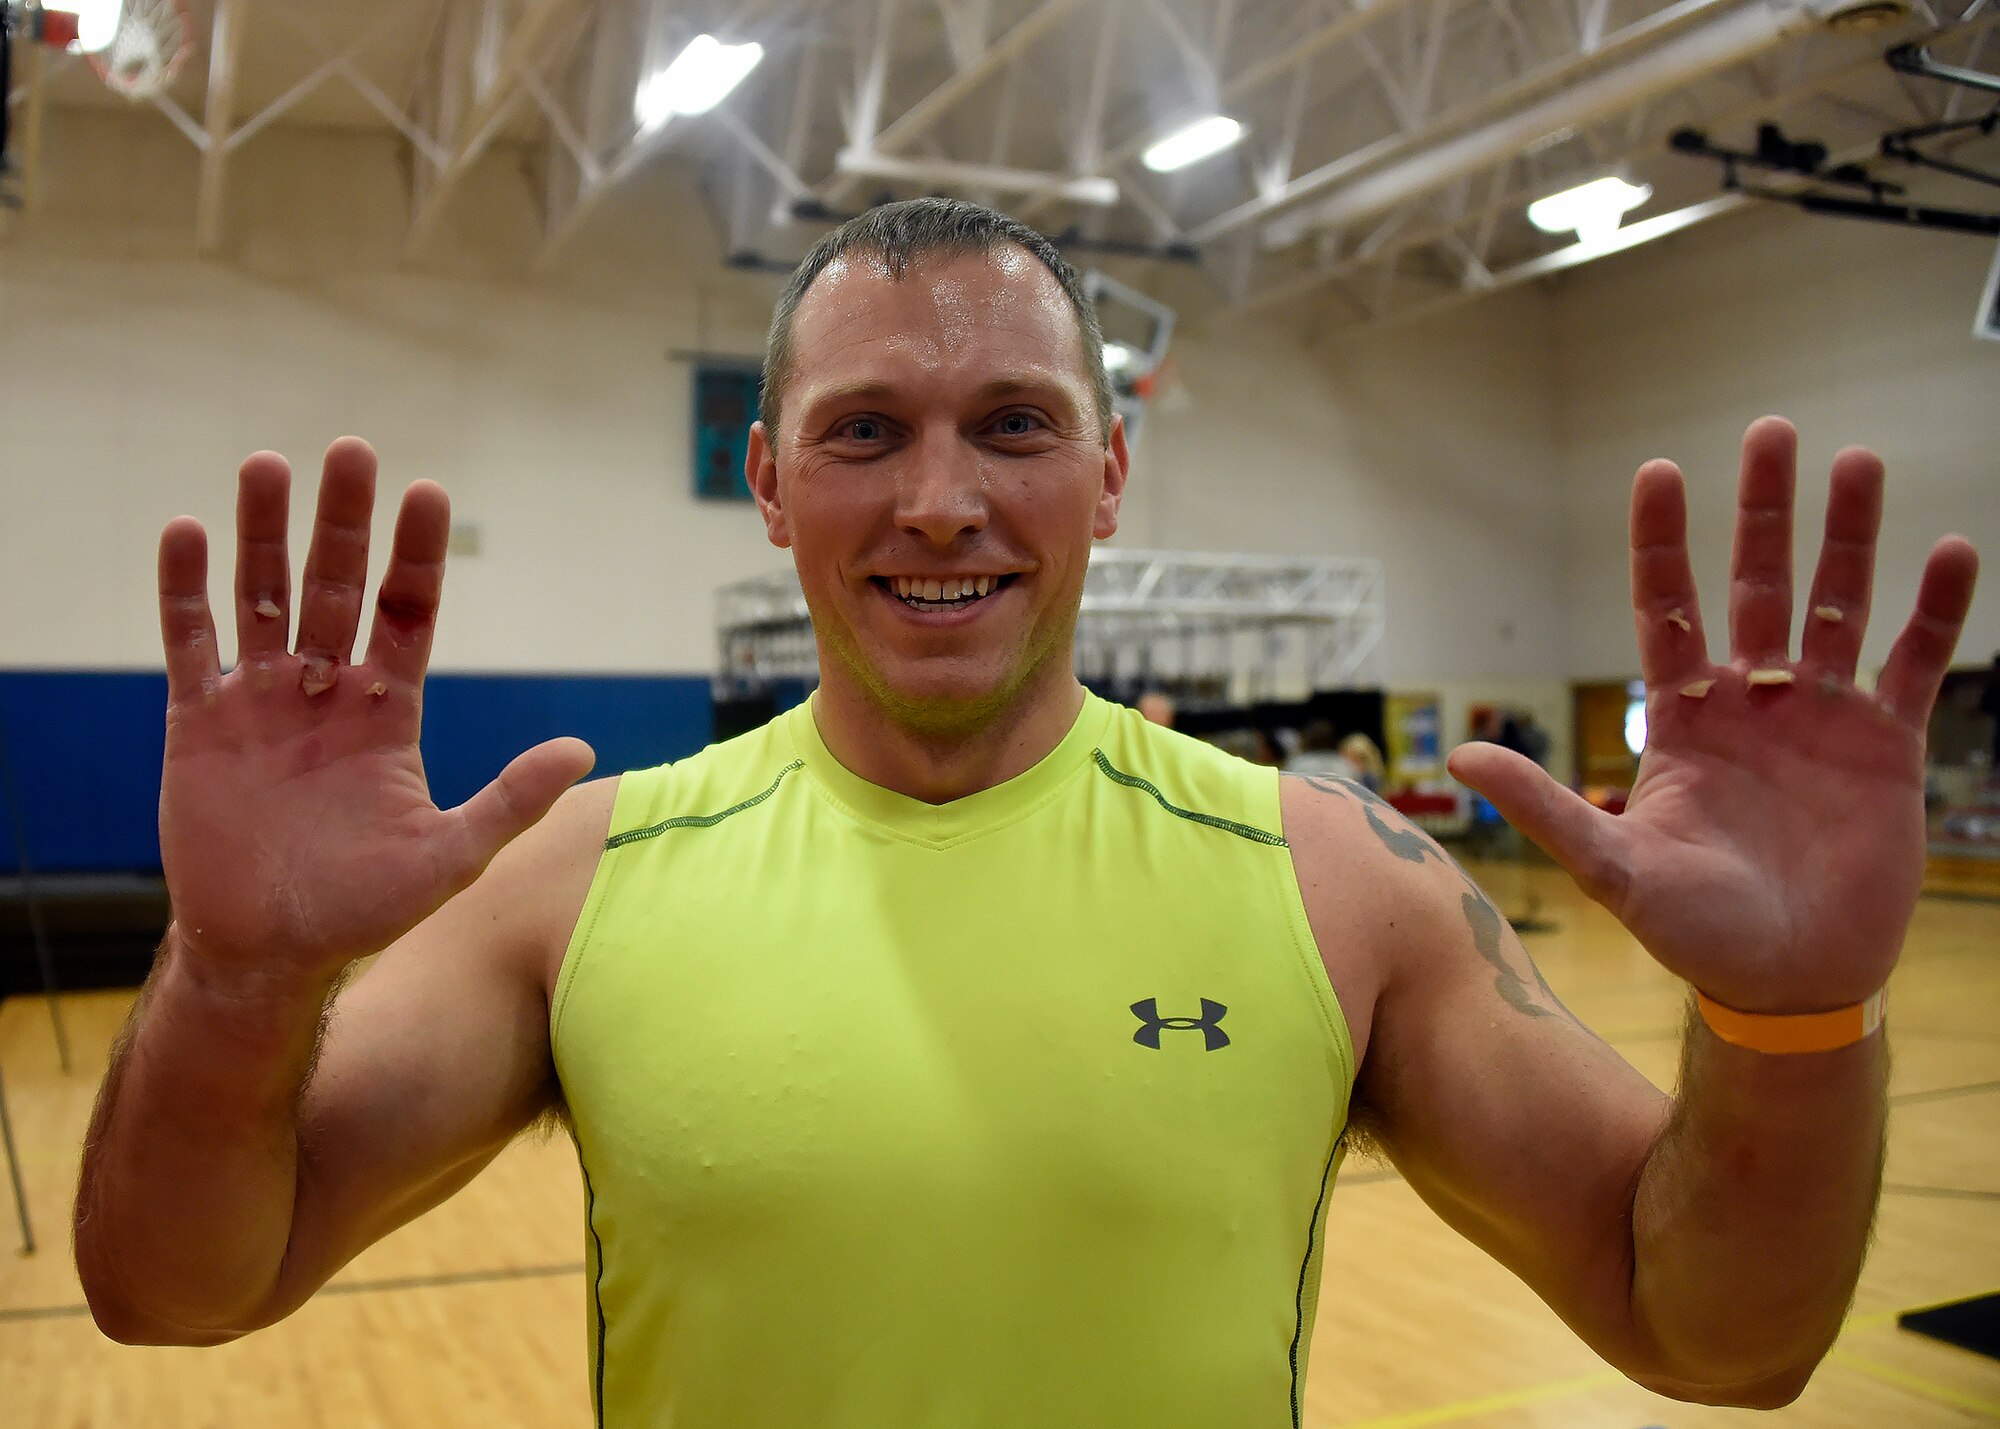 Staff Agt. Brian Davis, 56th Component Maintenance Squadron hydraulic shift lead, shows off his battle scars after completing the Alpha Warrior competition April 27, 2017, at Luke Air Force Base, Ariz. The Alpha Warrior program incorporates the four domains of Comprehensive Airman Fitness- physical, mental, social and spiritual-to achieve readiness and resilience at home and while deployed. (U.S. Air Force photo by Senior Airman Devante Williams)